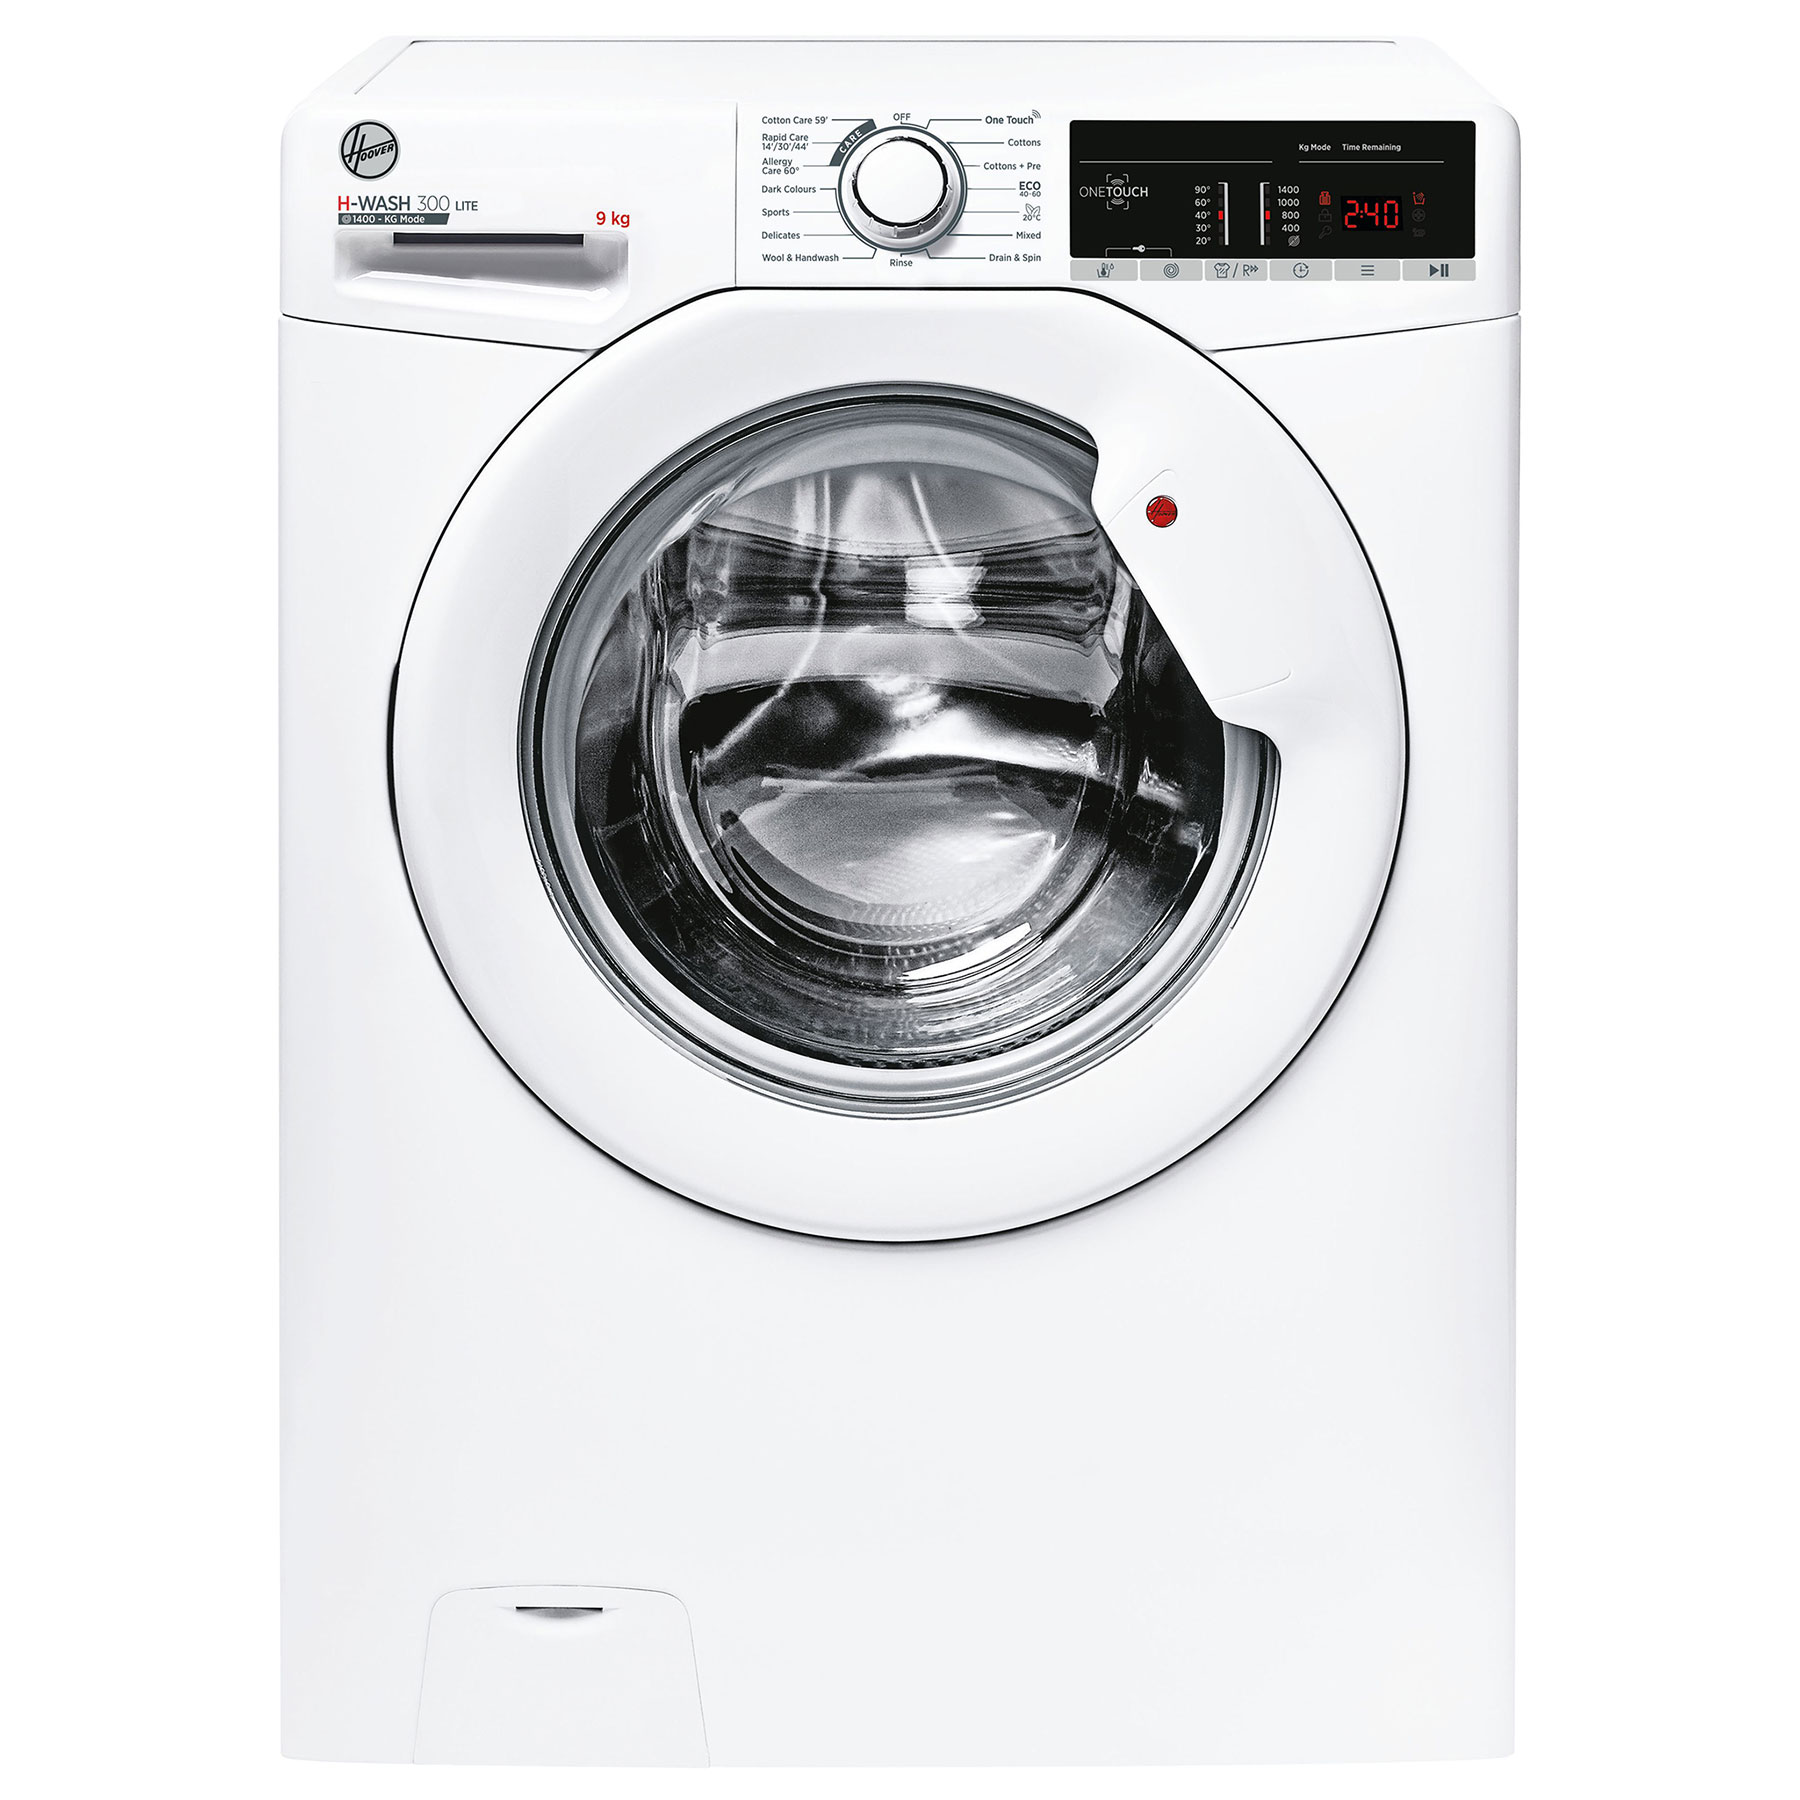 Hoover H3W49TA41 Washing Machine in White 1400rpm 9Kg B Rated NFC